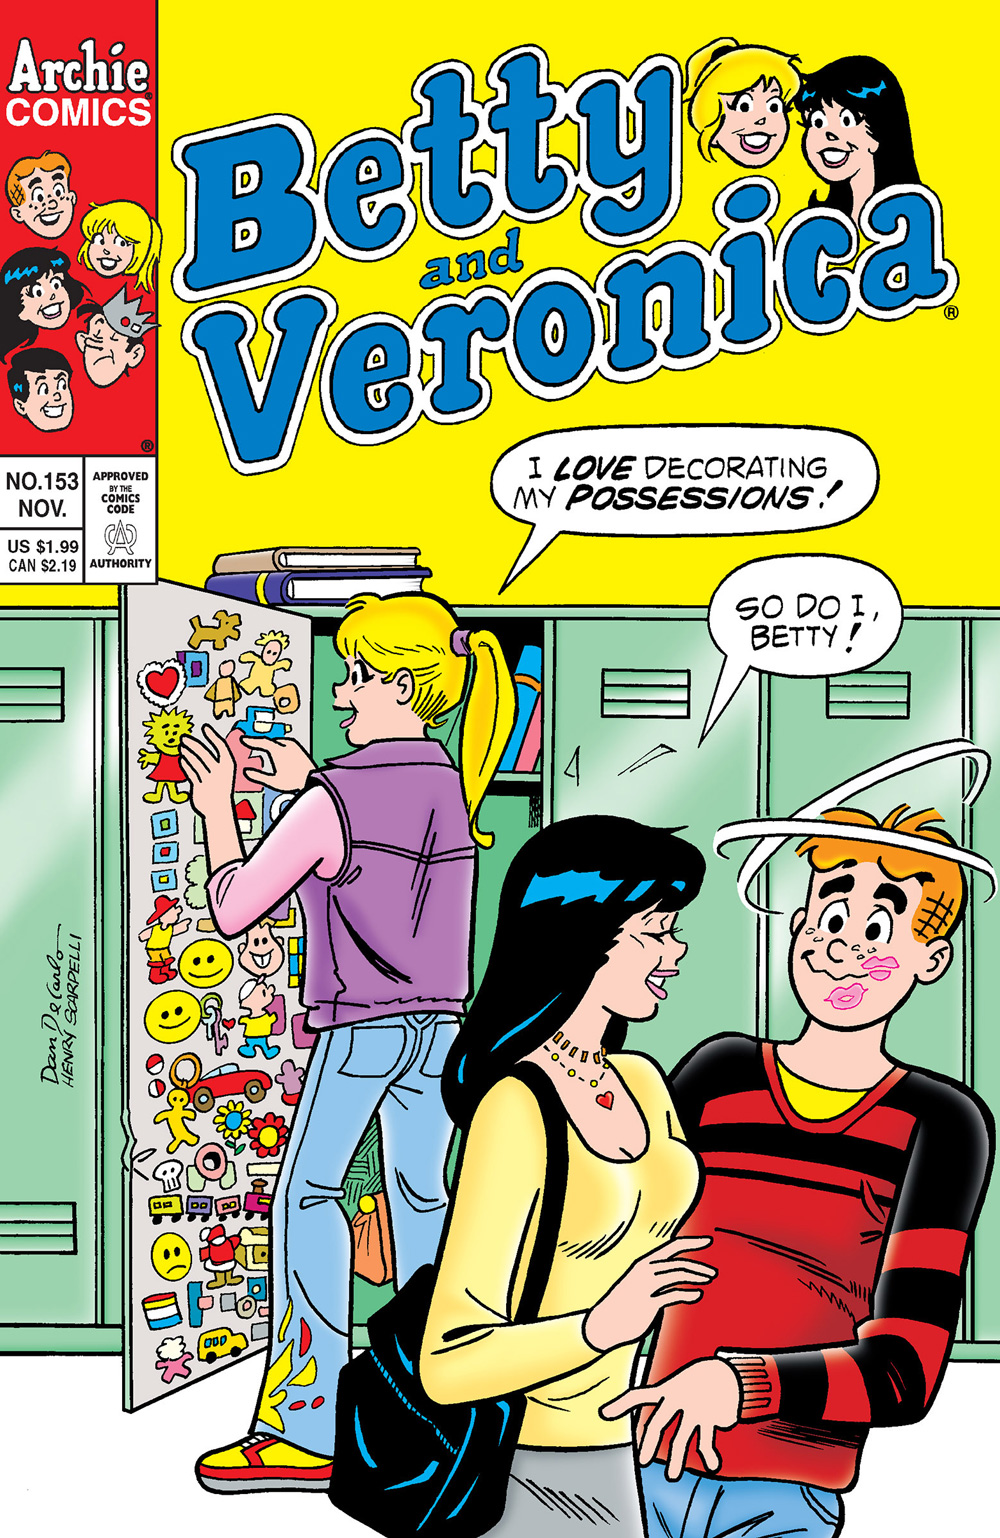 Betty is decorating her locker in high school, while Veronica kisses Archie in the foreground, behind her back. They both say they love decorating their possessions.